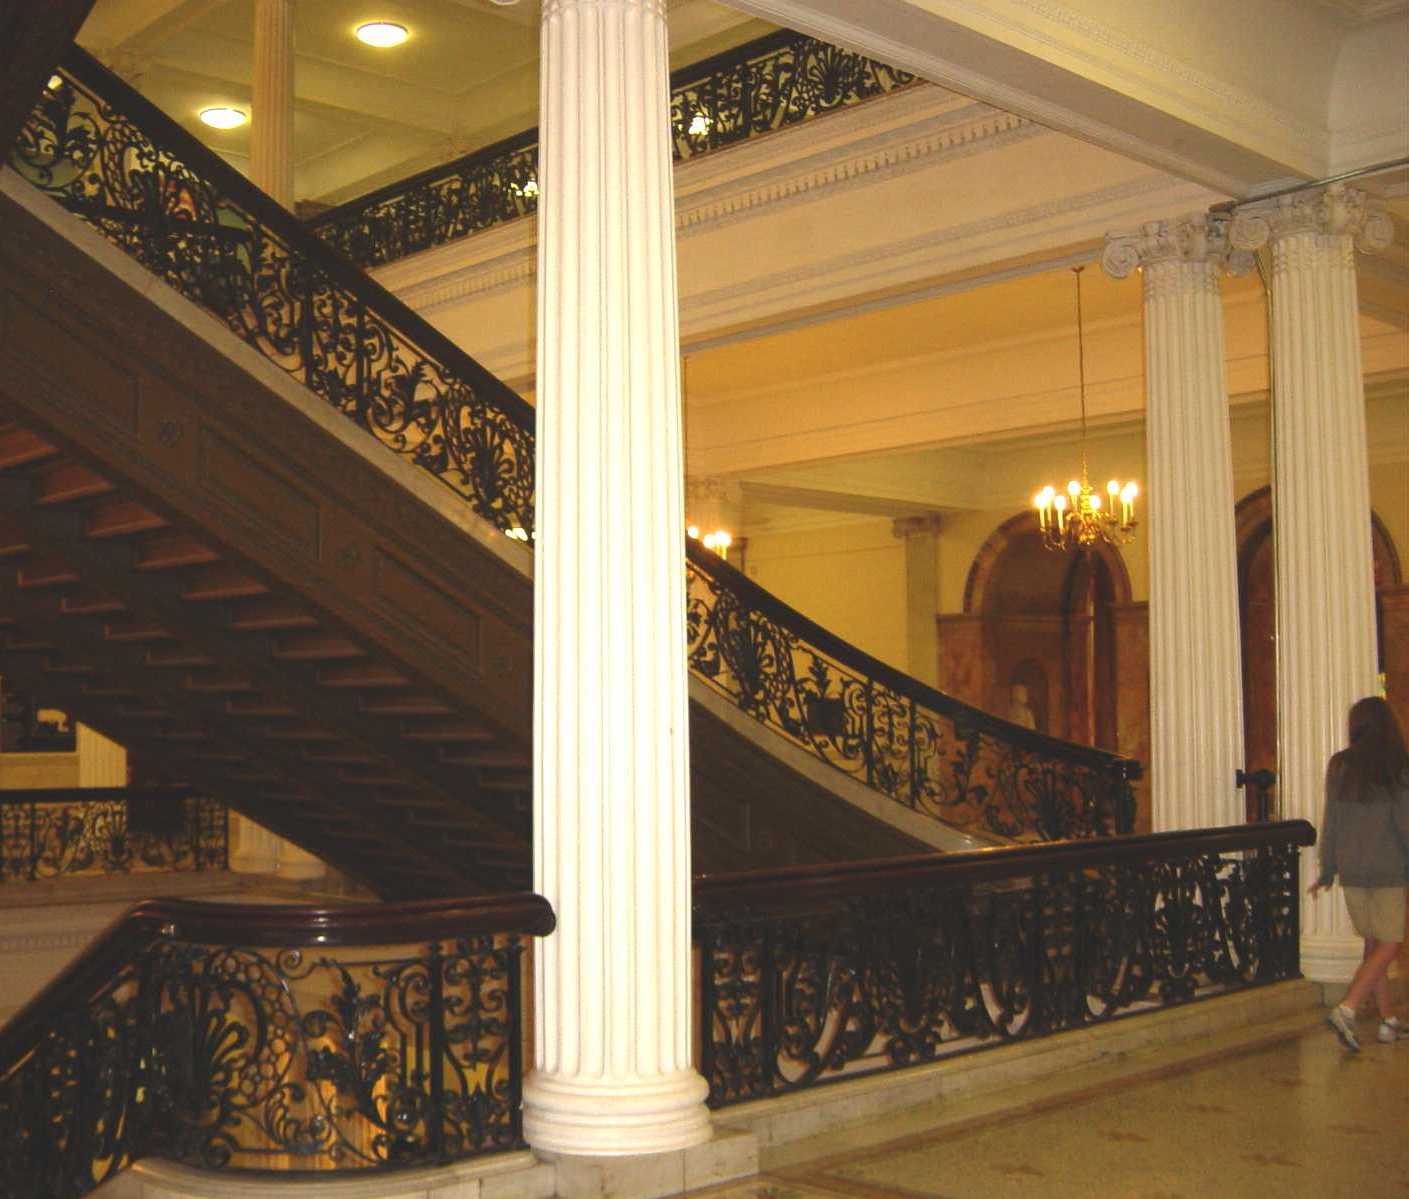 The marble staircase